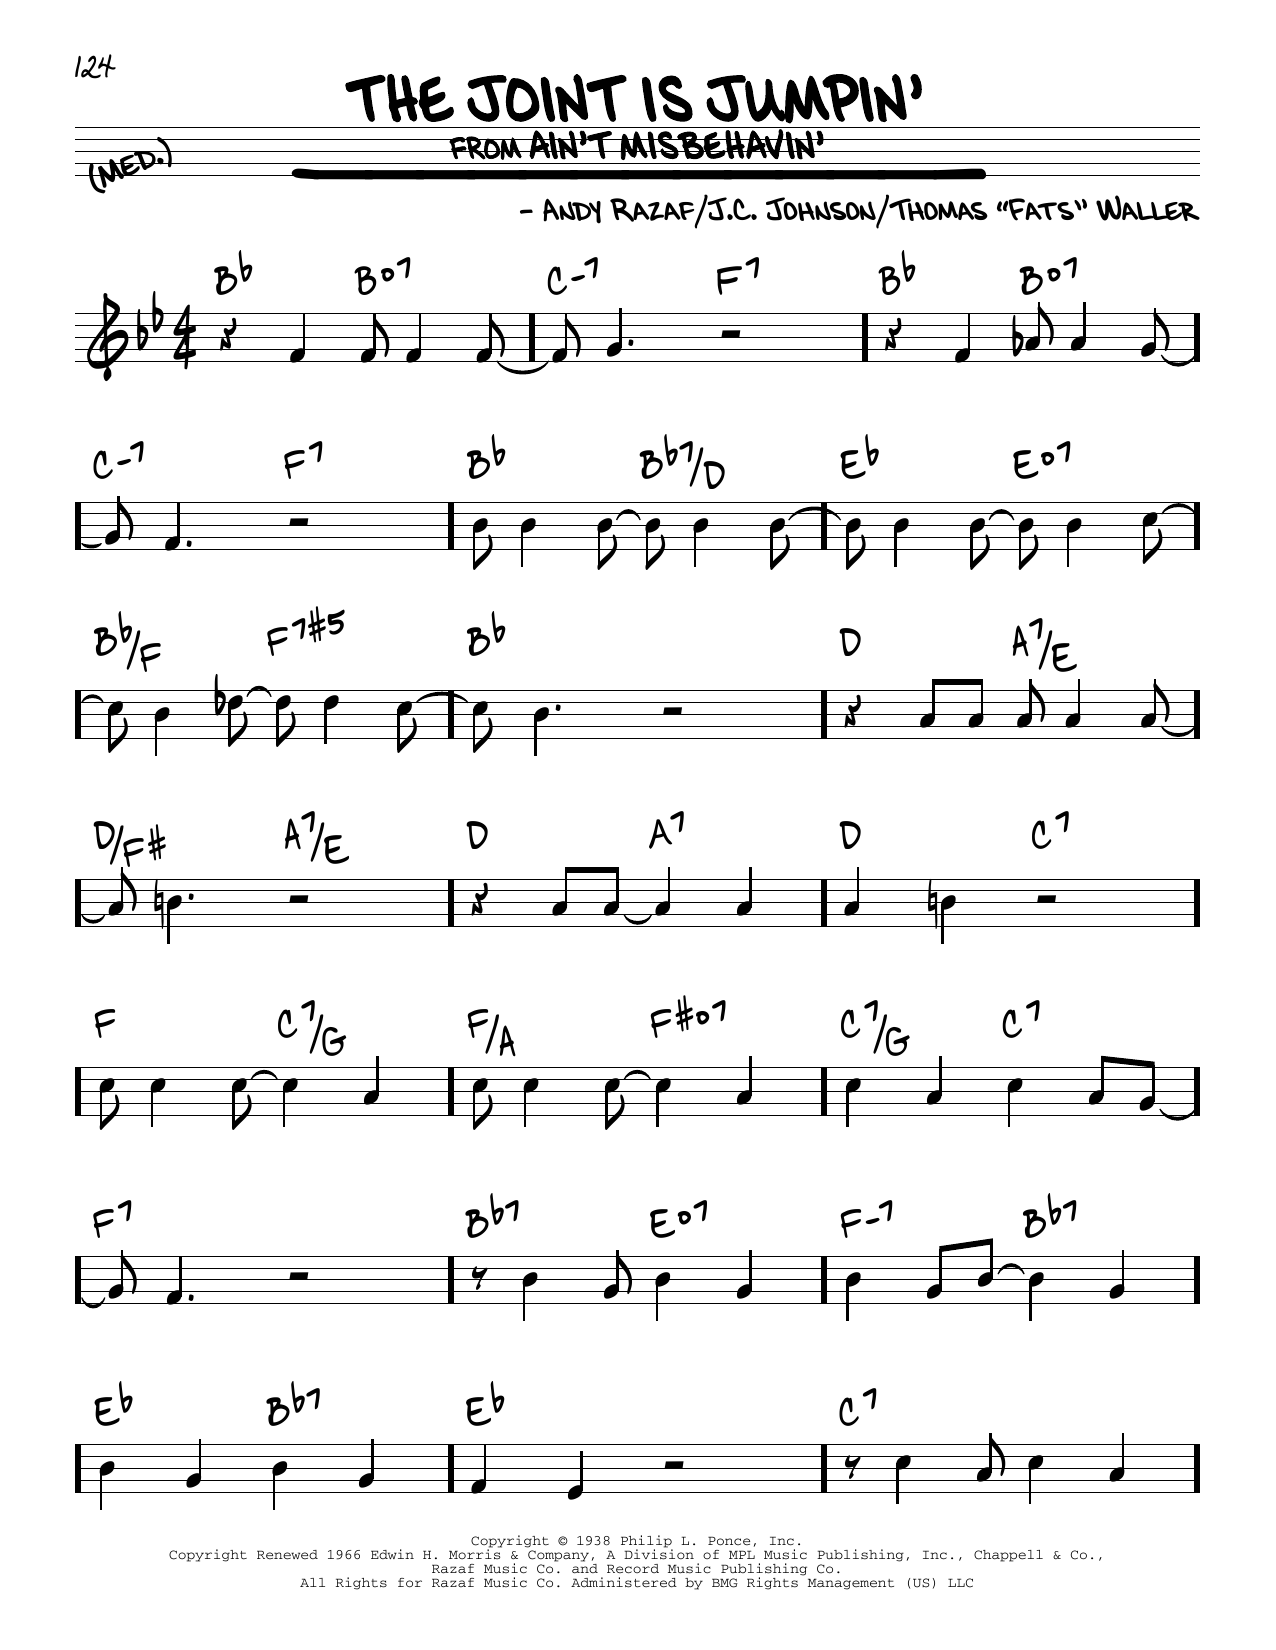 Download J.C. Johnson The Joint Is Jumpin' Sheet Music